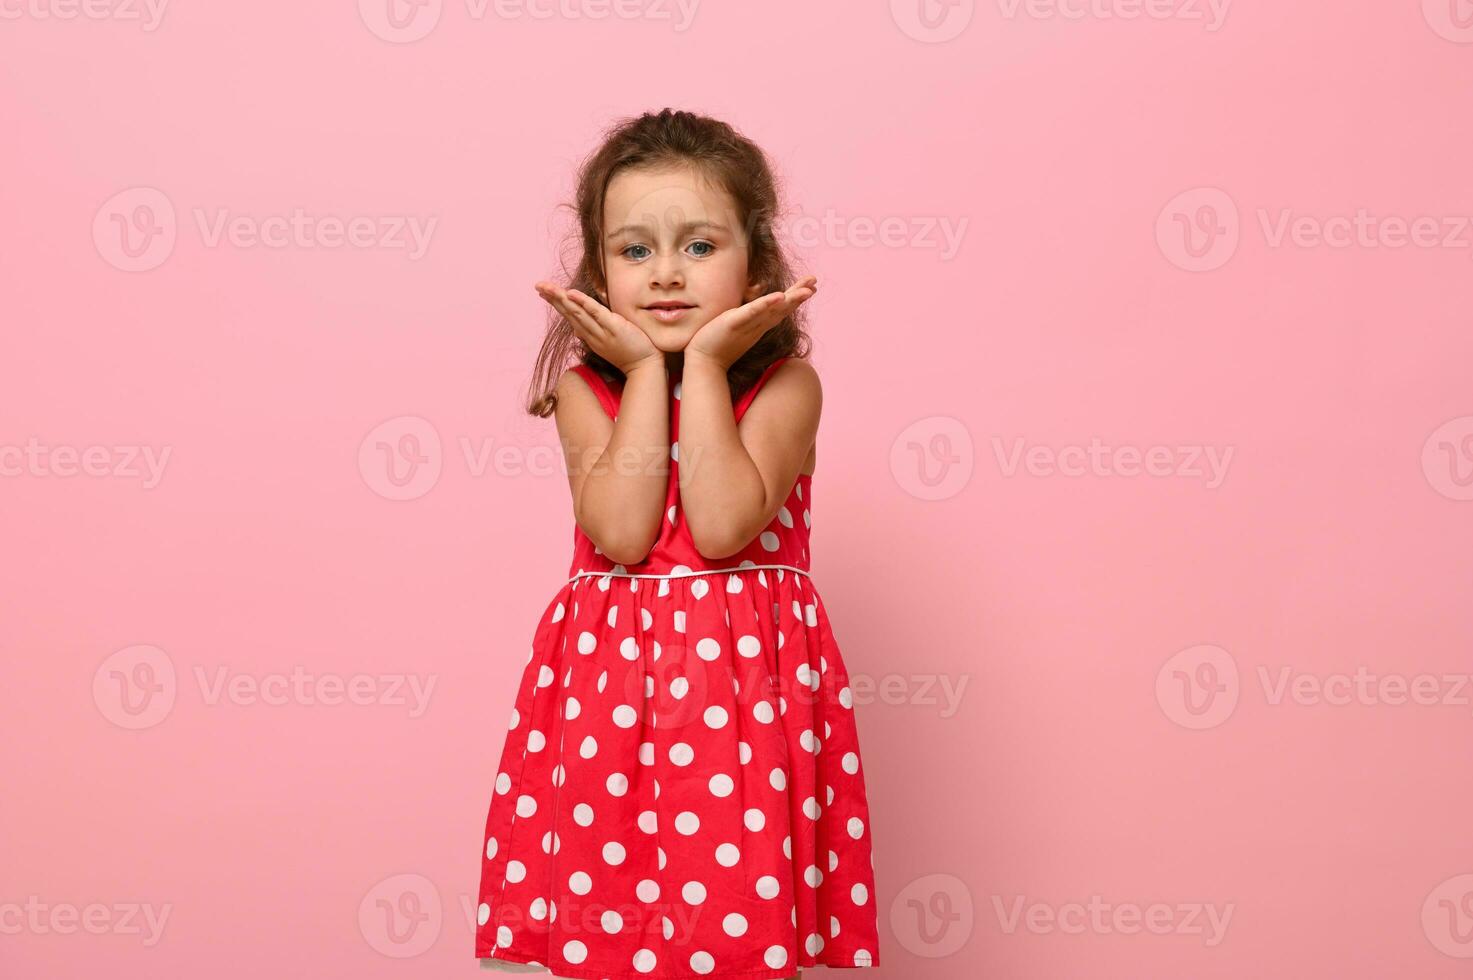 Adorable girl in a pink dress with polka dots poses at the camera, standing against a pink background and holding her chin with her hands. Portrait of a beautiful girl with positive joyful emotions photo